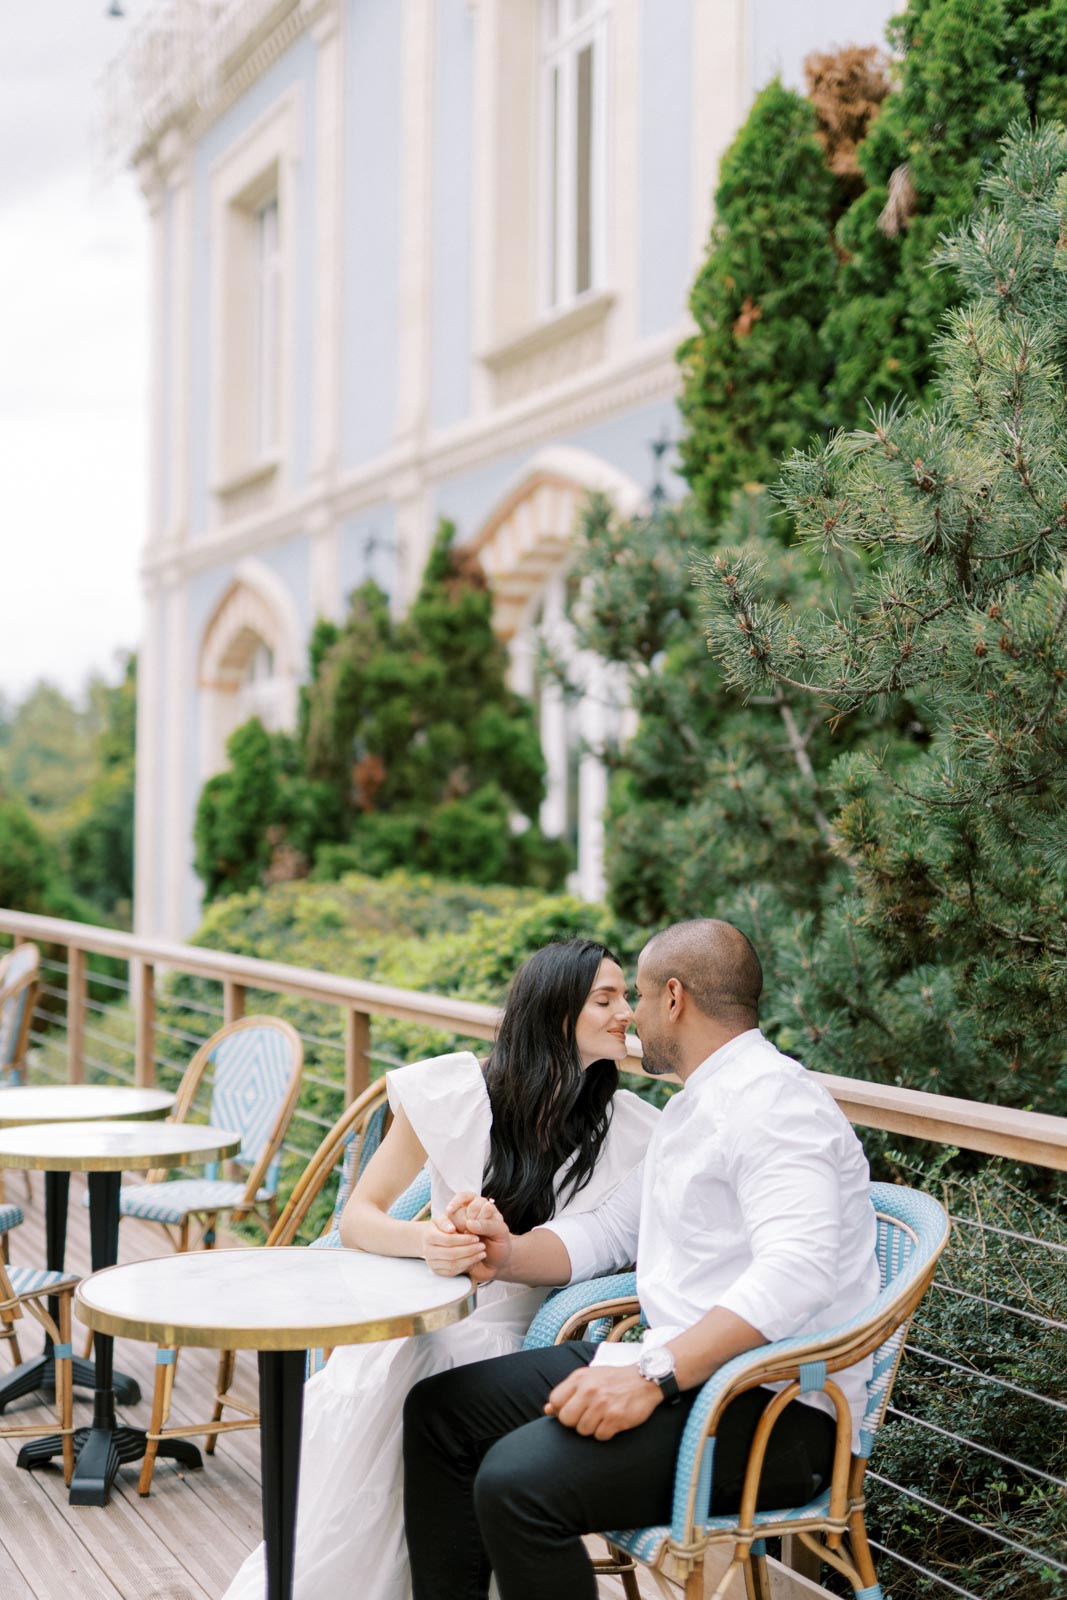 Engagement Photos Champagne France Wineries | Chernogorov Photography